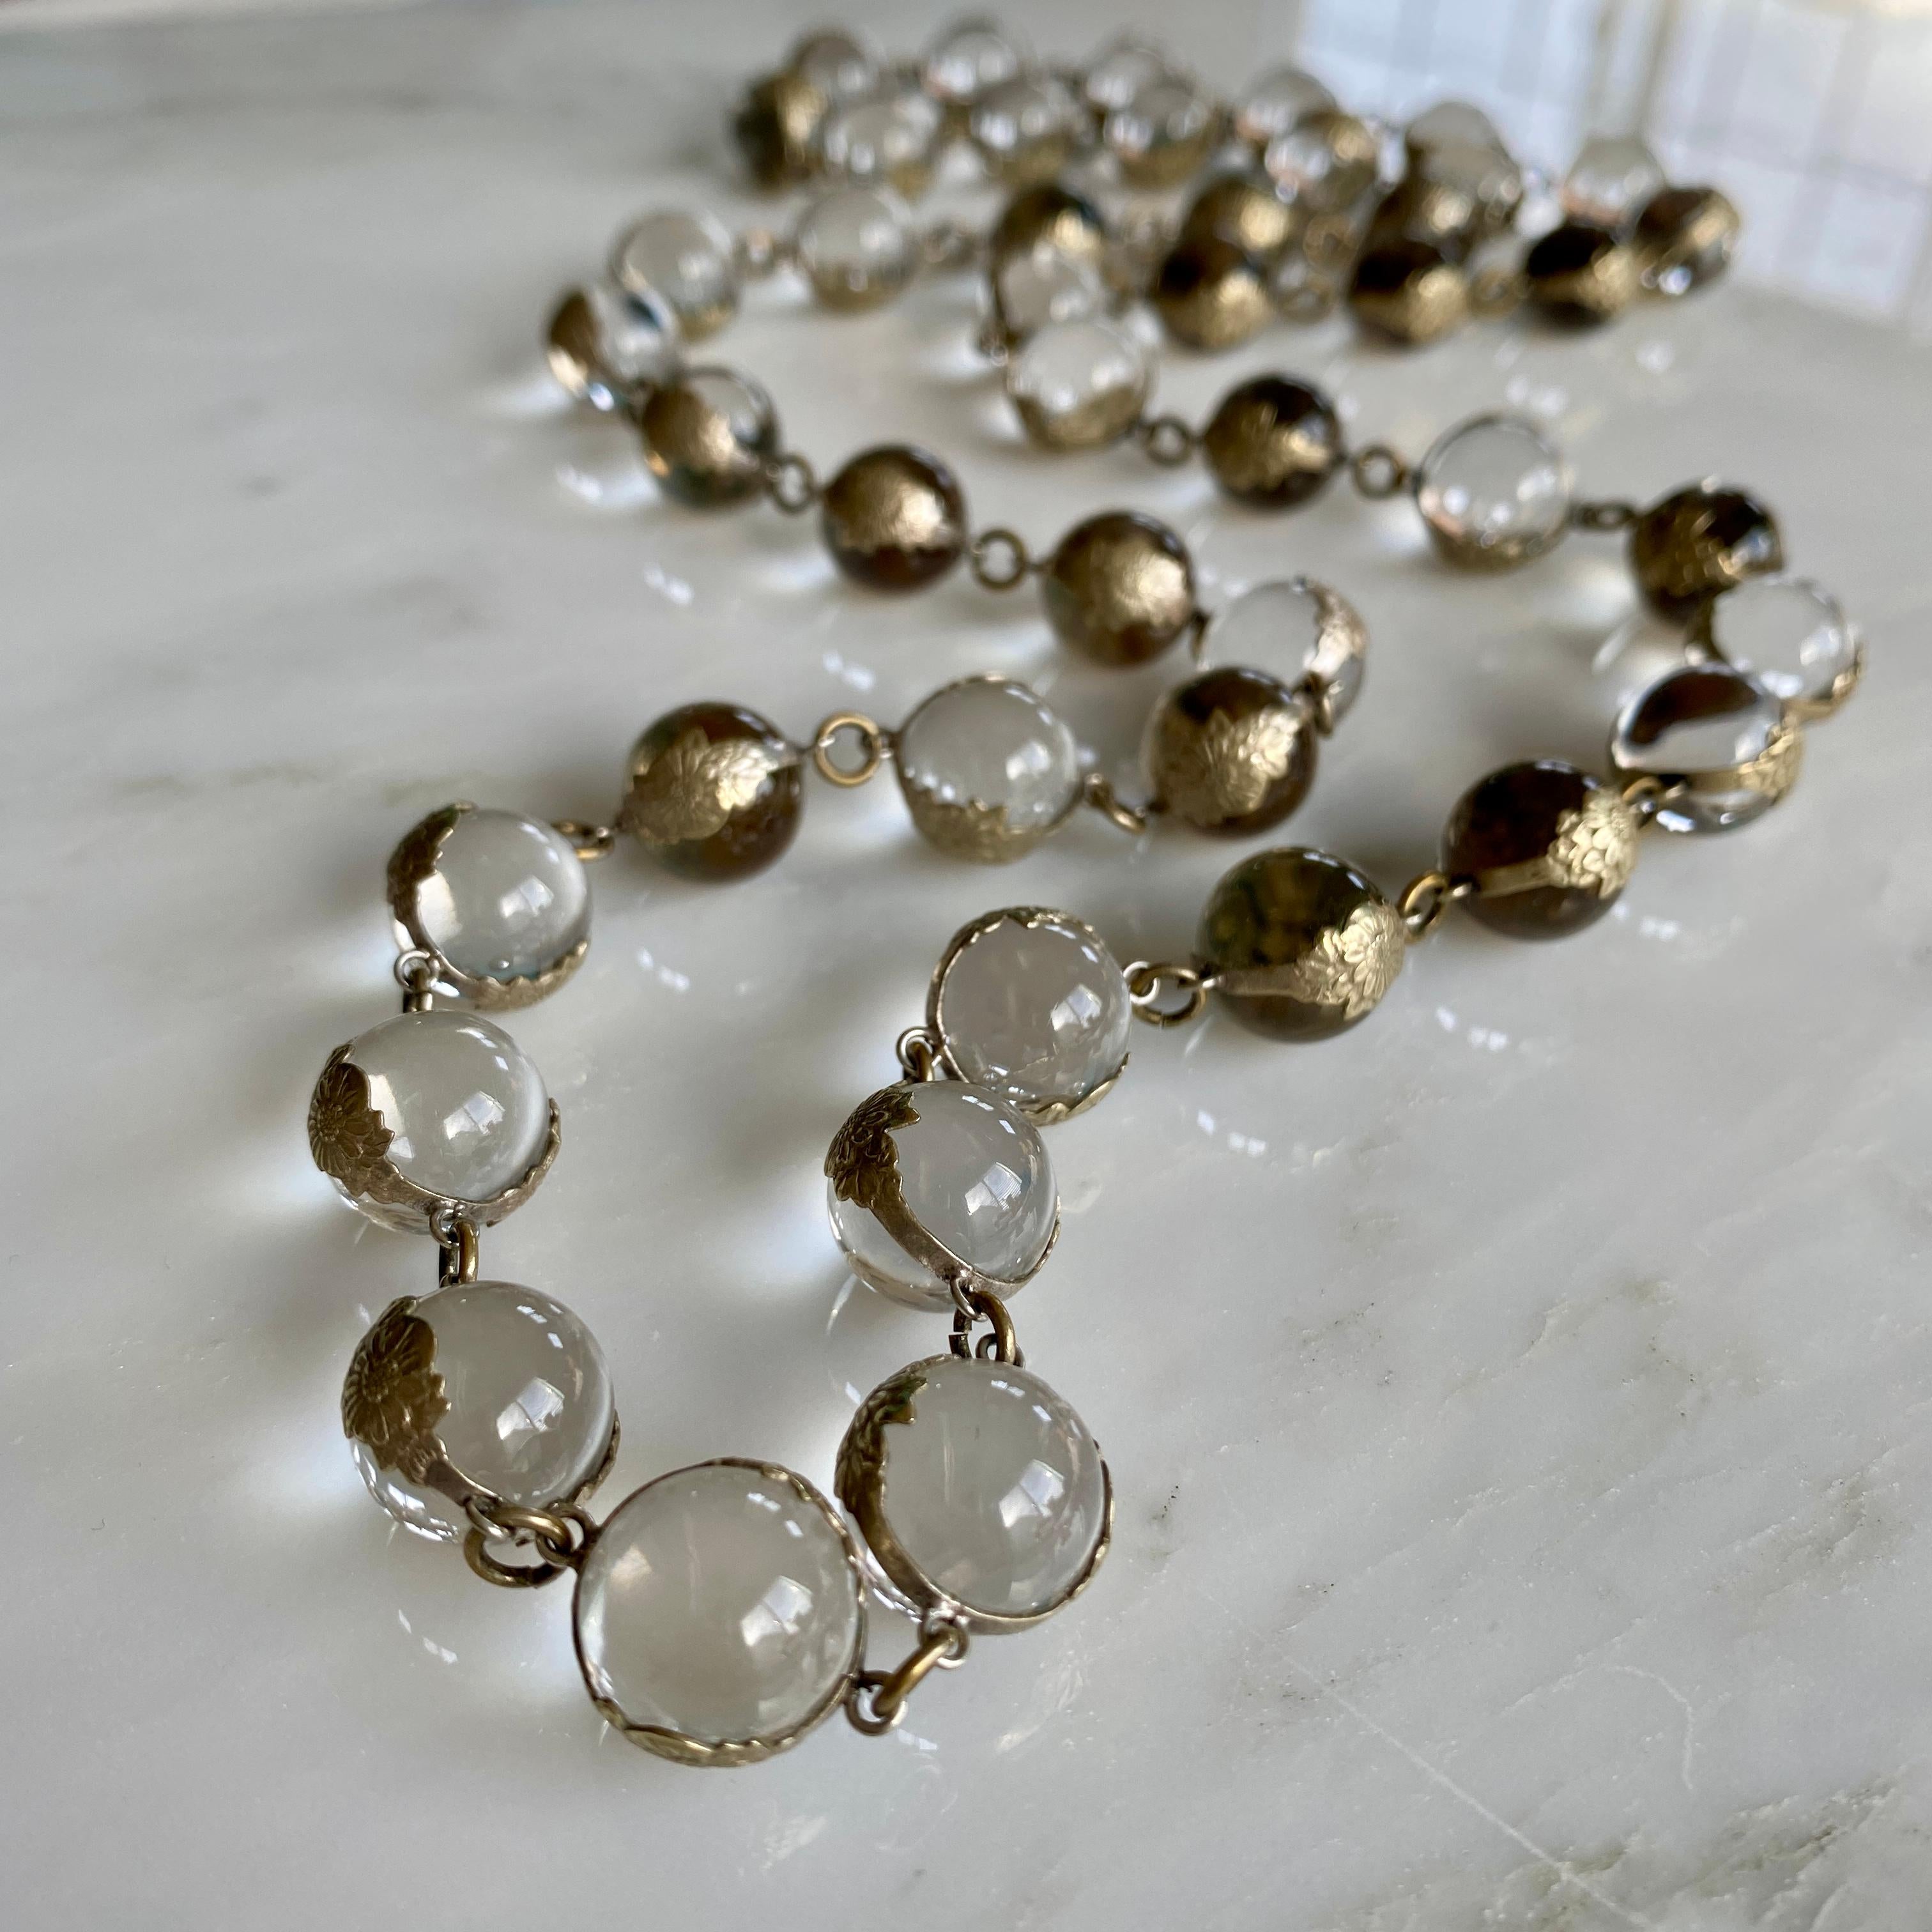 Details:
Fabulous Art Deco Pools of Light necklace in sterling silver. Necklace is in wonderful condition, and is 36 inches in length. The 45 clear orbs making up the balls Pools of Light are un-drilled, and held in place with floral silver gilt